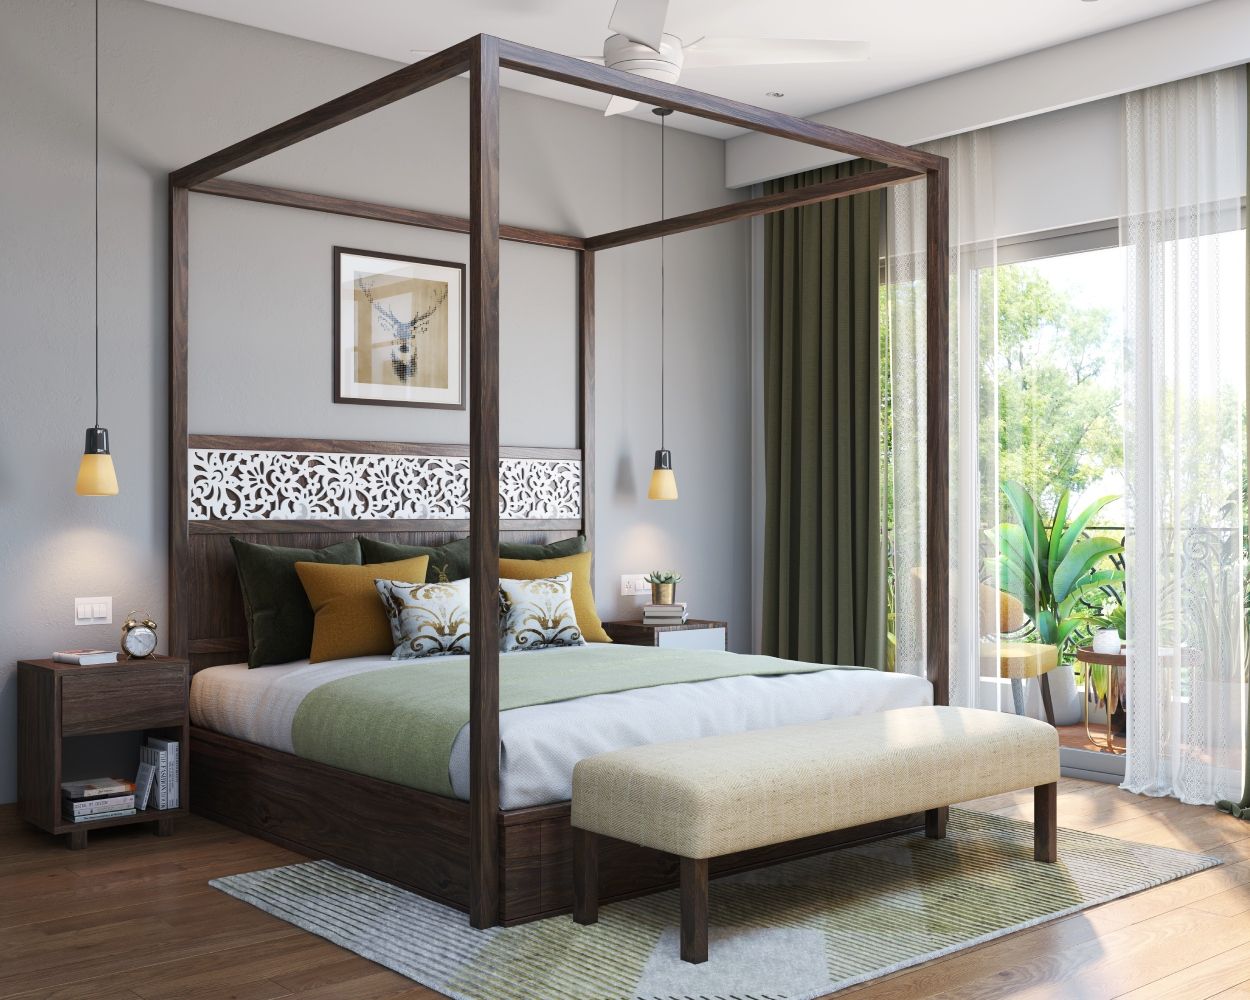 Grey Contemporary Master Bedroom Design With Four-Poster Bed